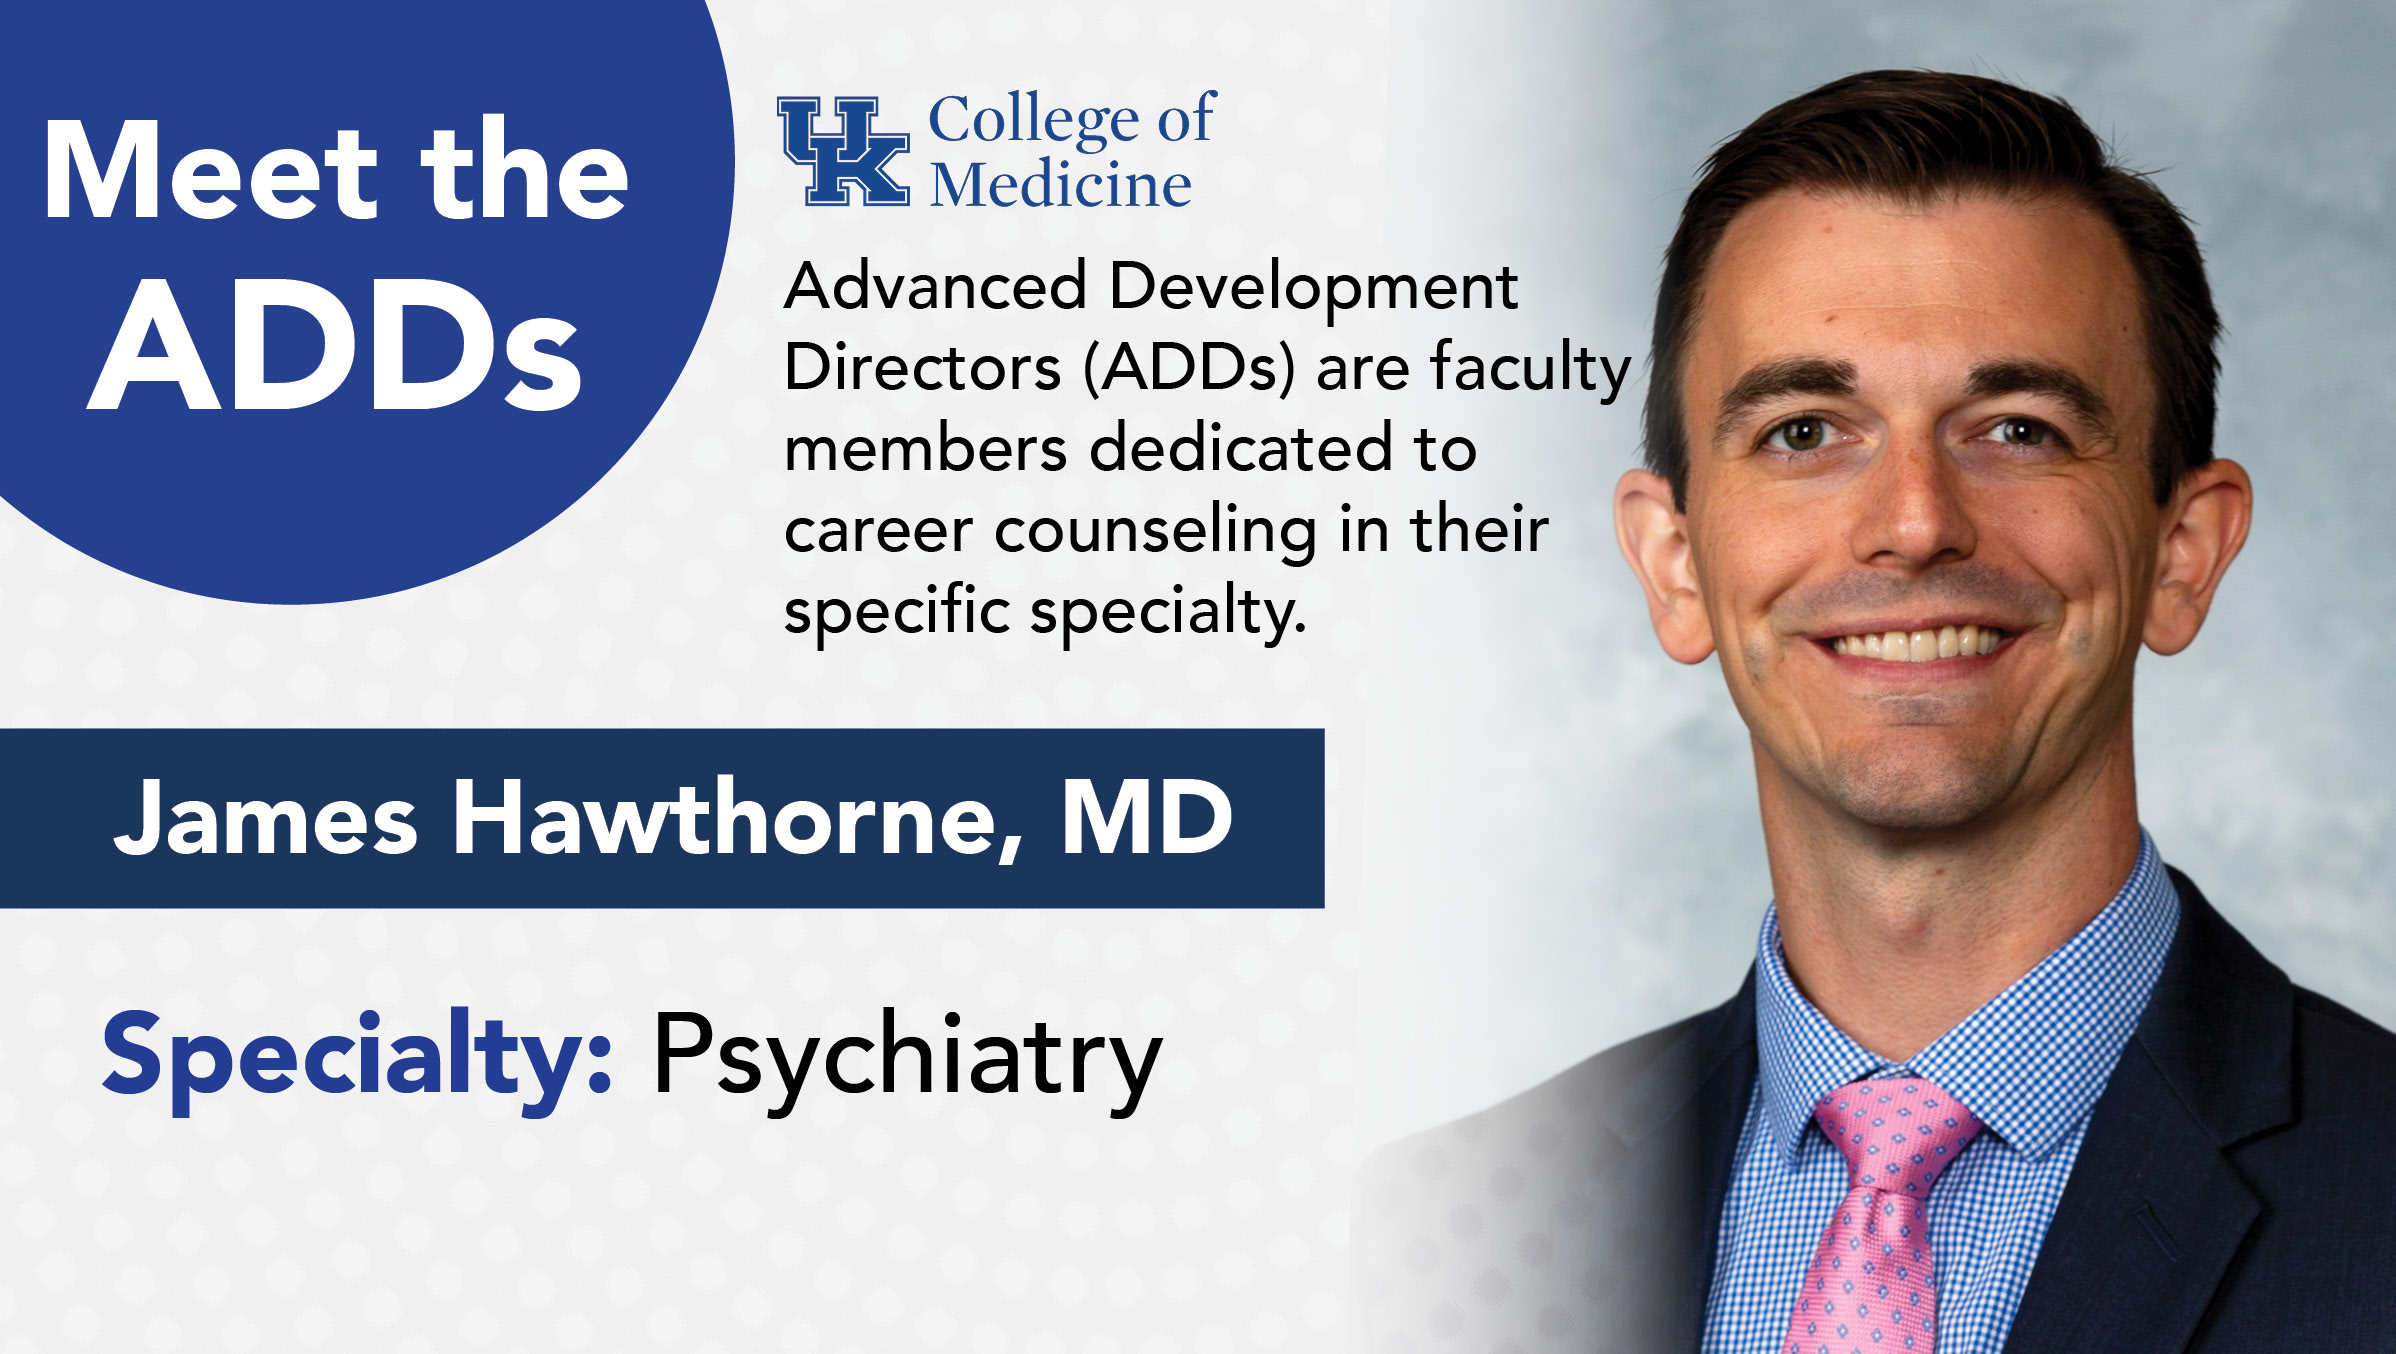 meet the ADDs spotlight on Dr. James Hawthorne, who specializes in psychiatry